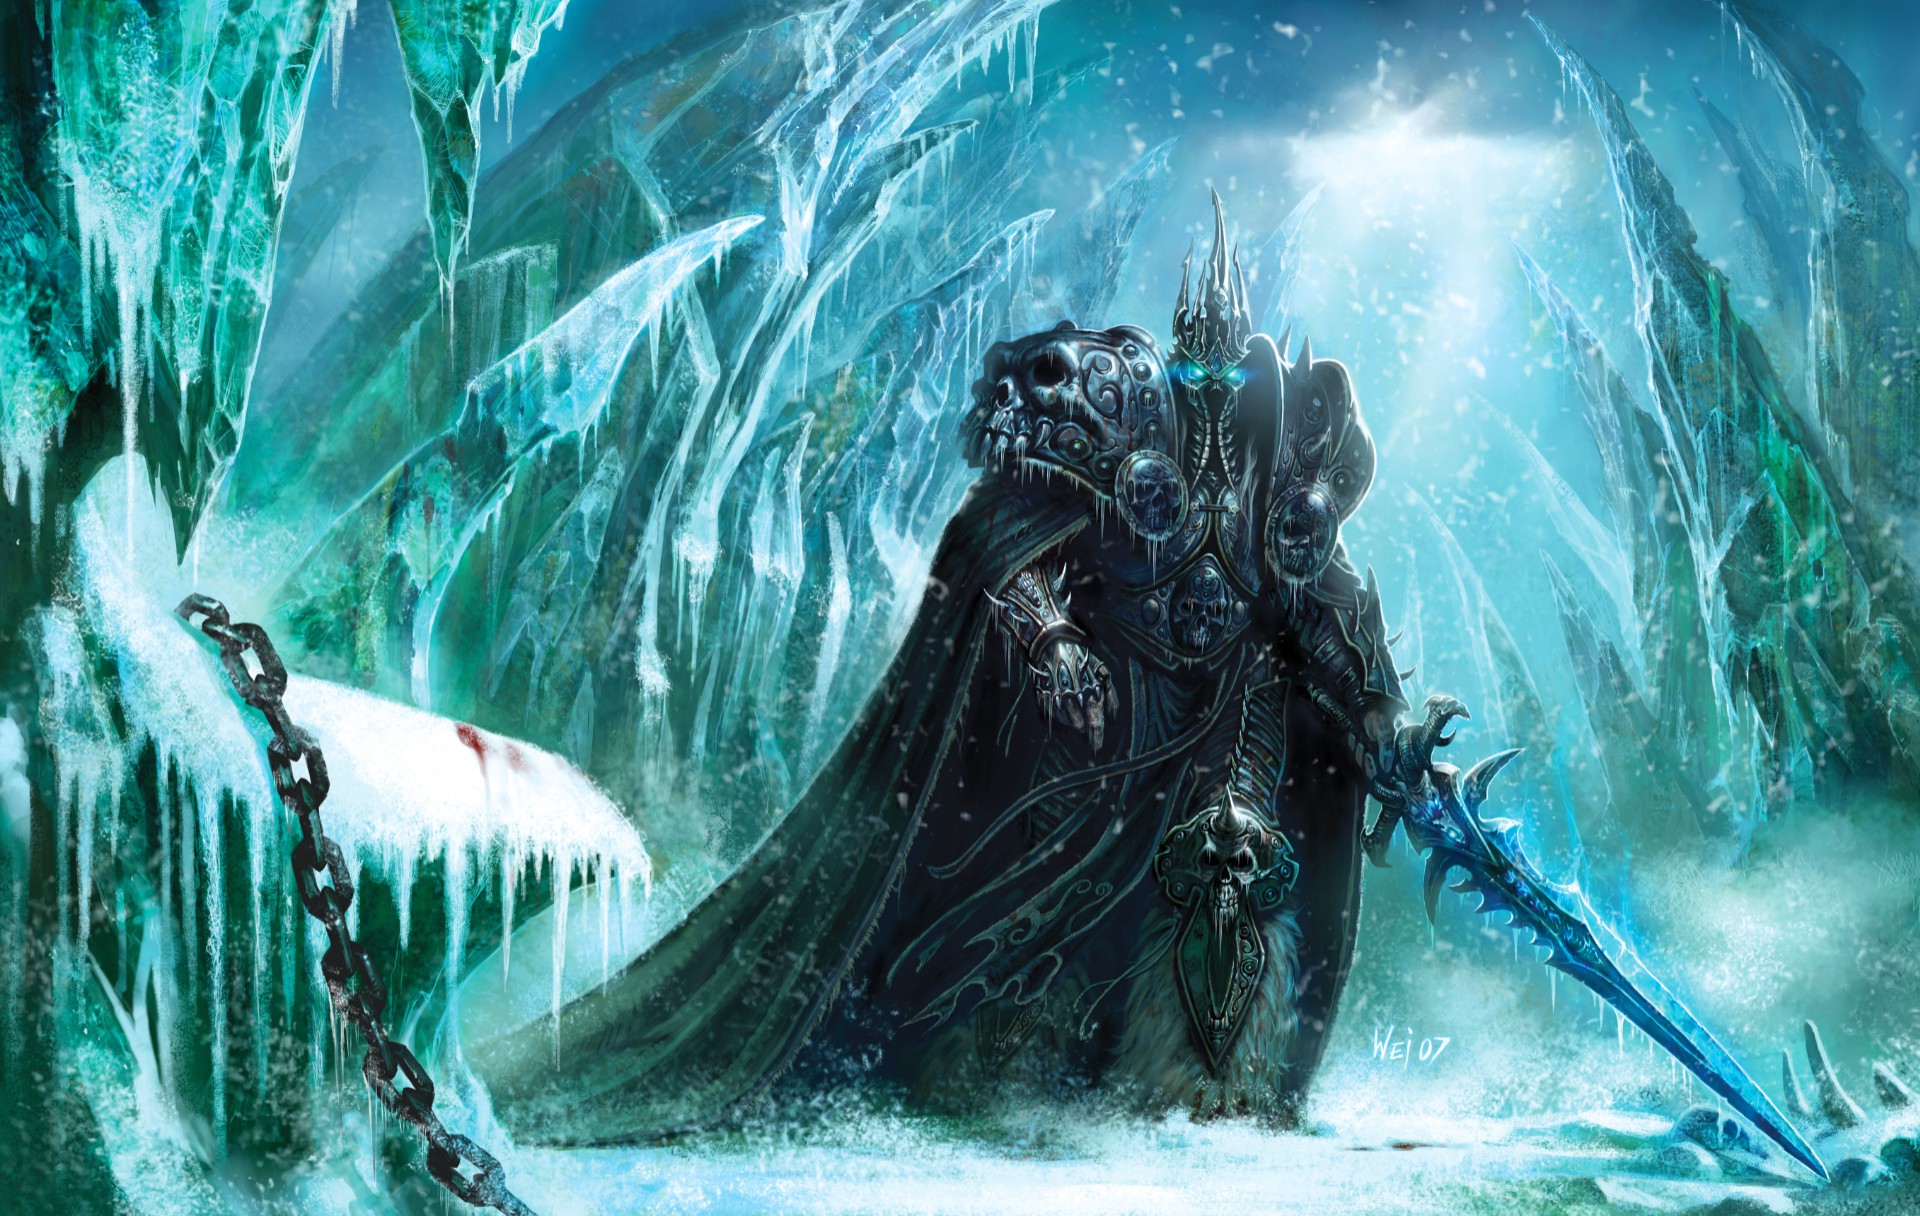 https://www.candb.com/site/candb/images/artwork/the-reign-of-the-lich-king-world-of-warcraft-blizzard-entertainment.jpg